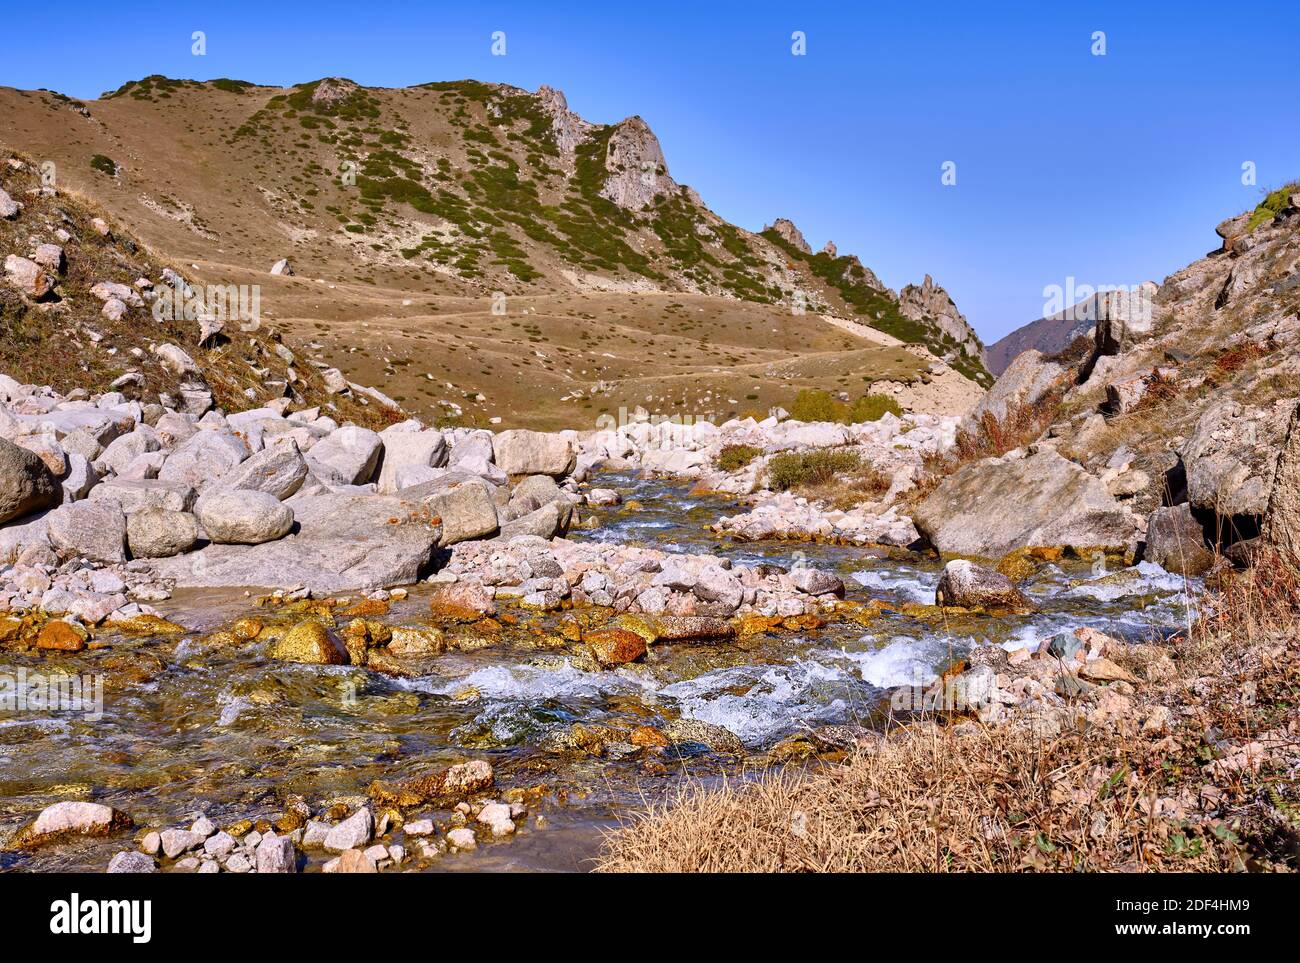 Alpine valley with a river and juniper-covered slopes on the background of  blue sky in autumn season Stock Photo